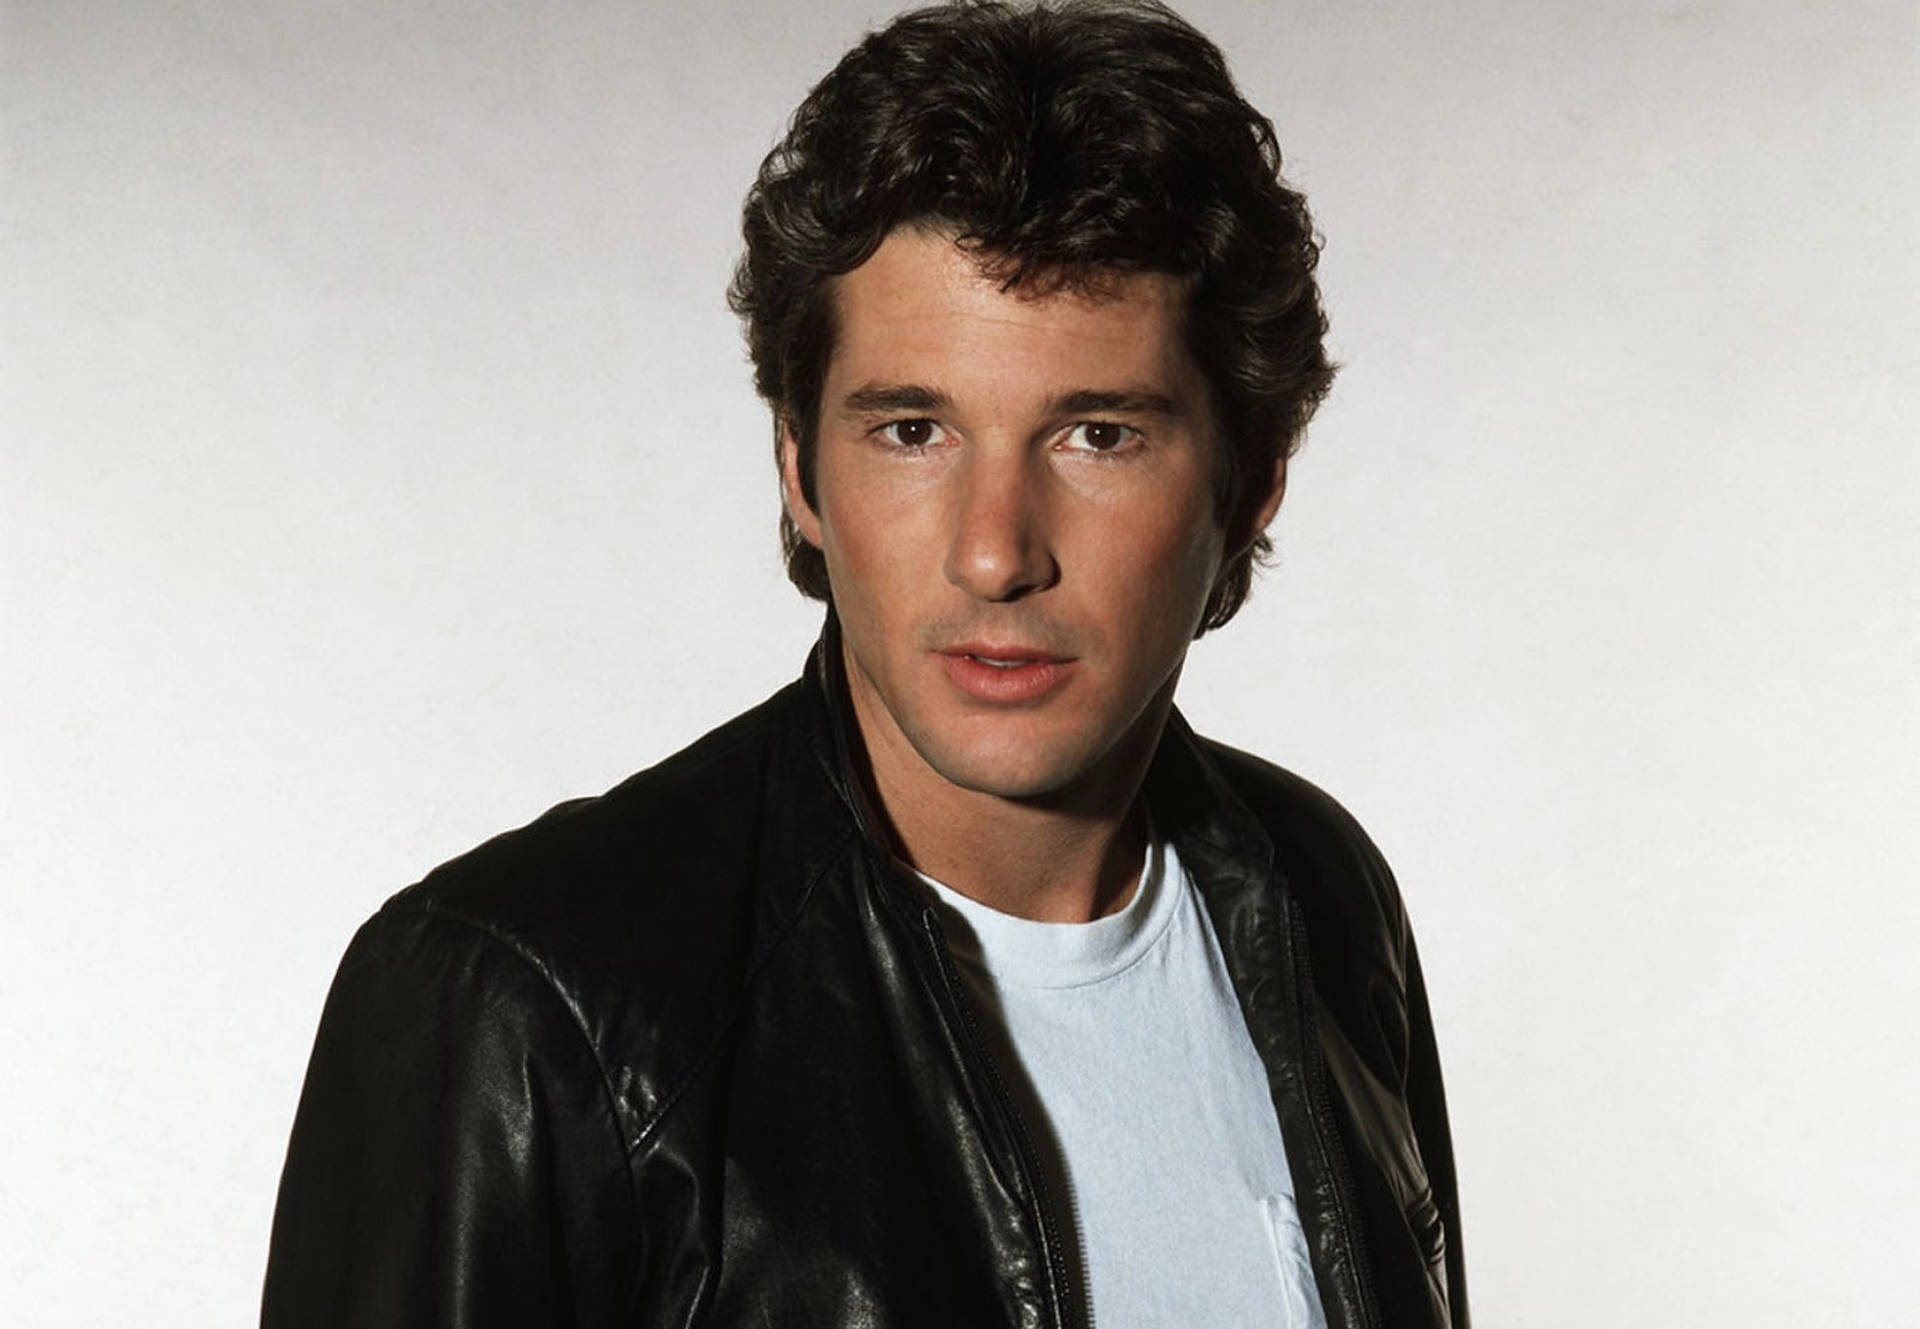 Captivating Portrait Of A Young Richard Gere Background